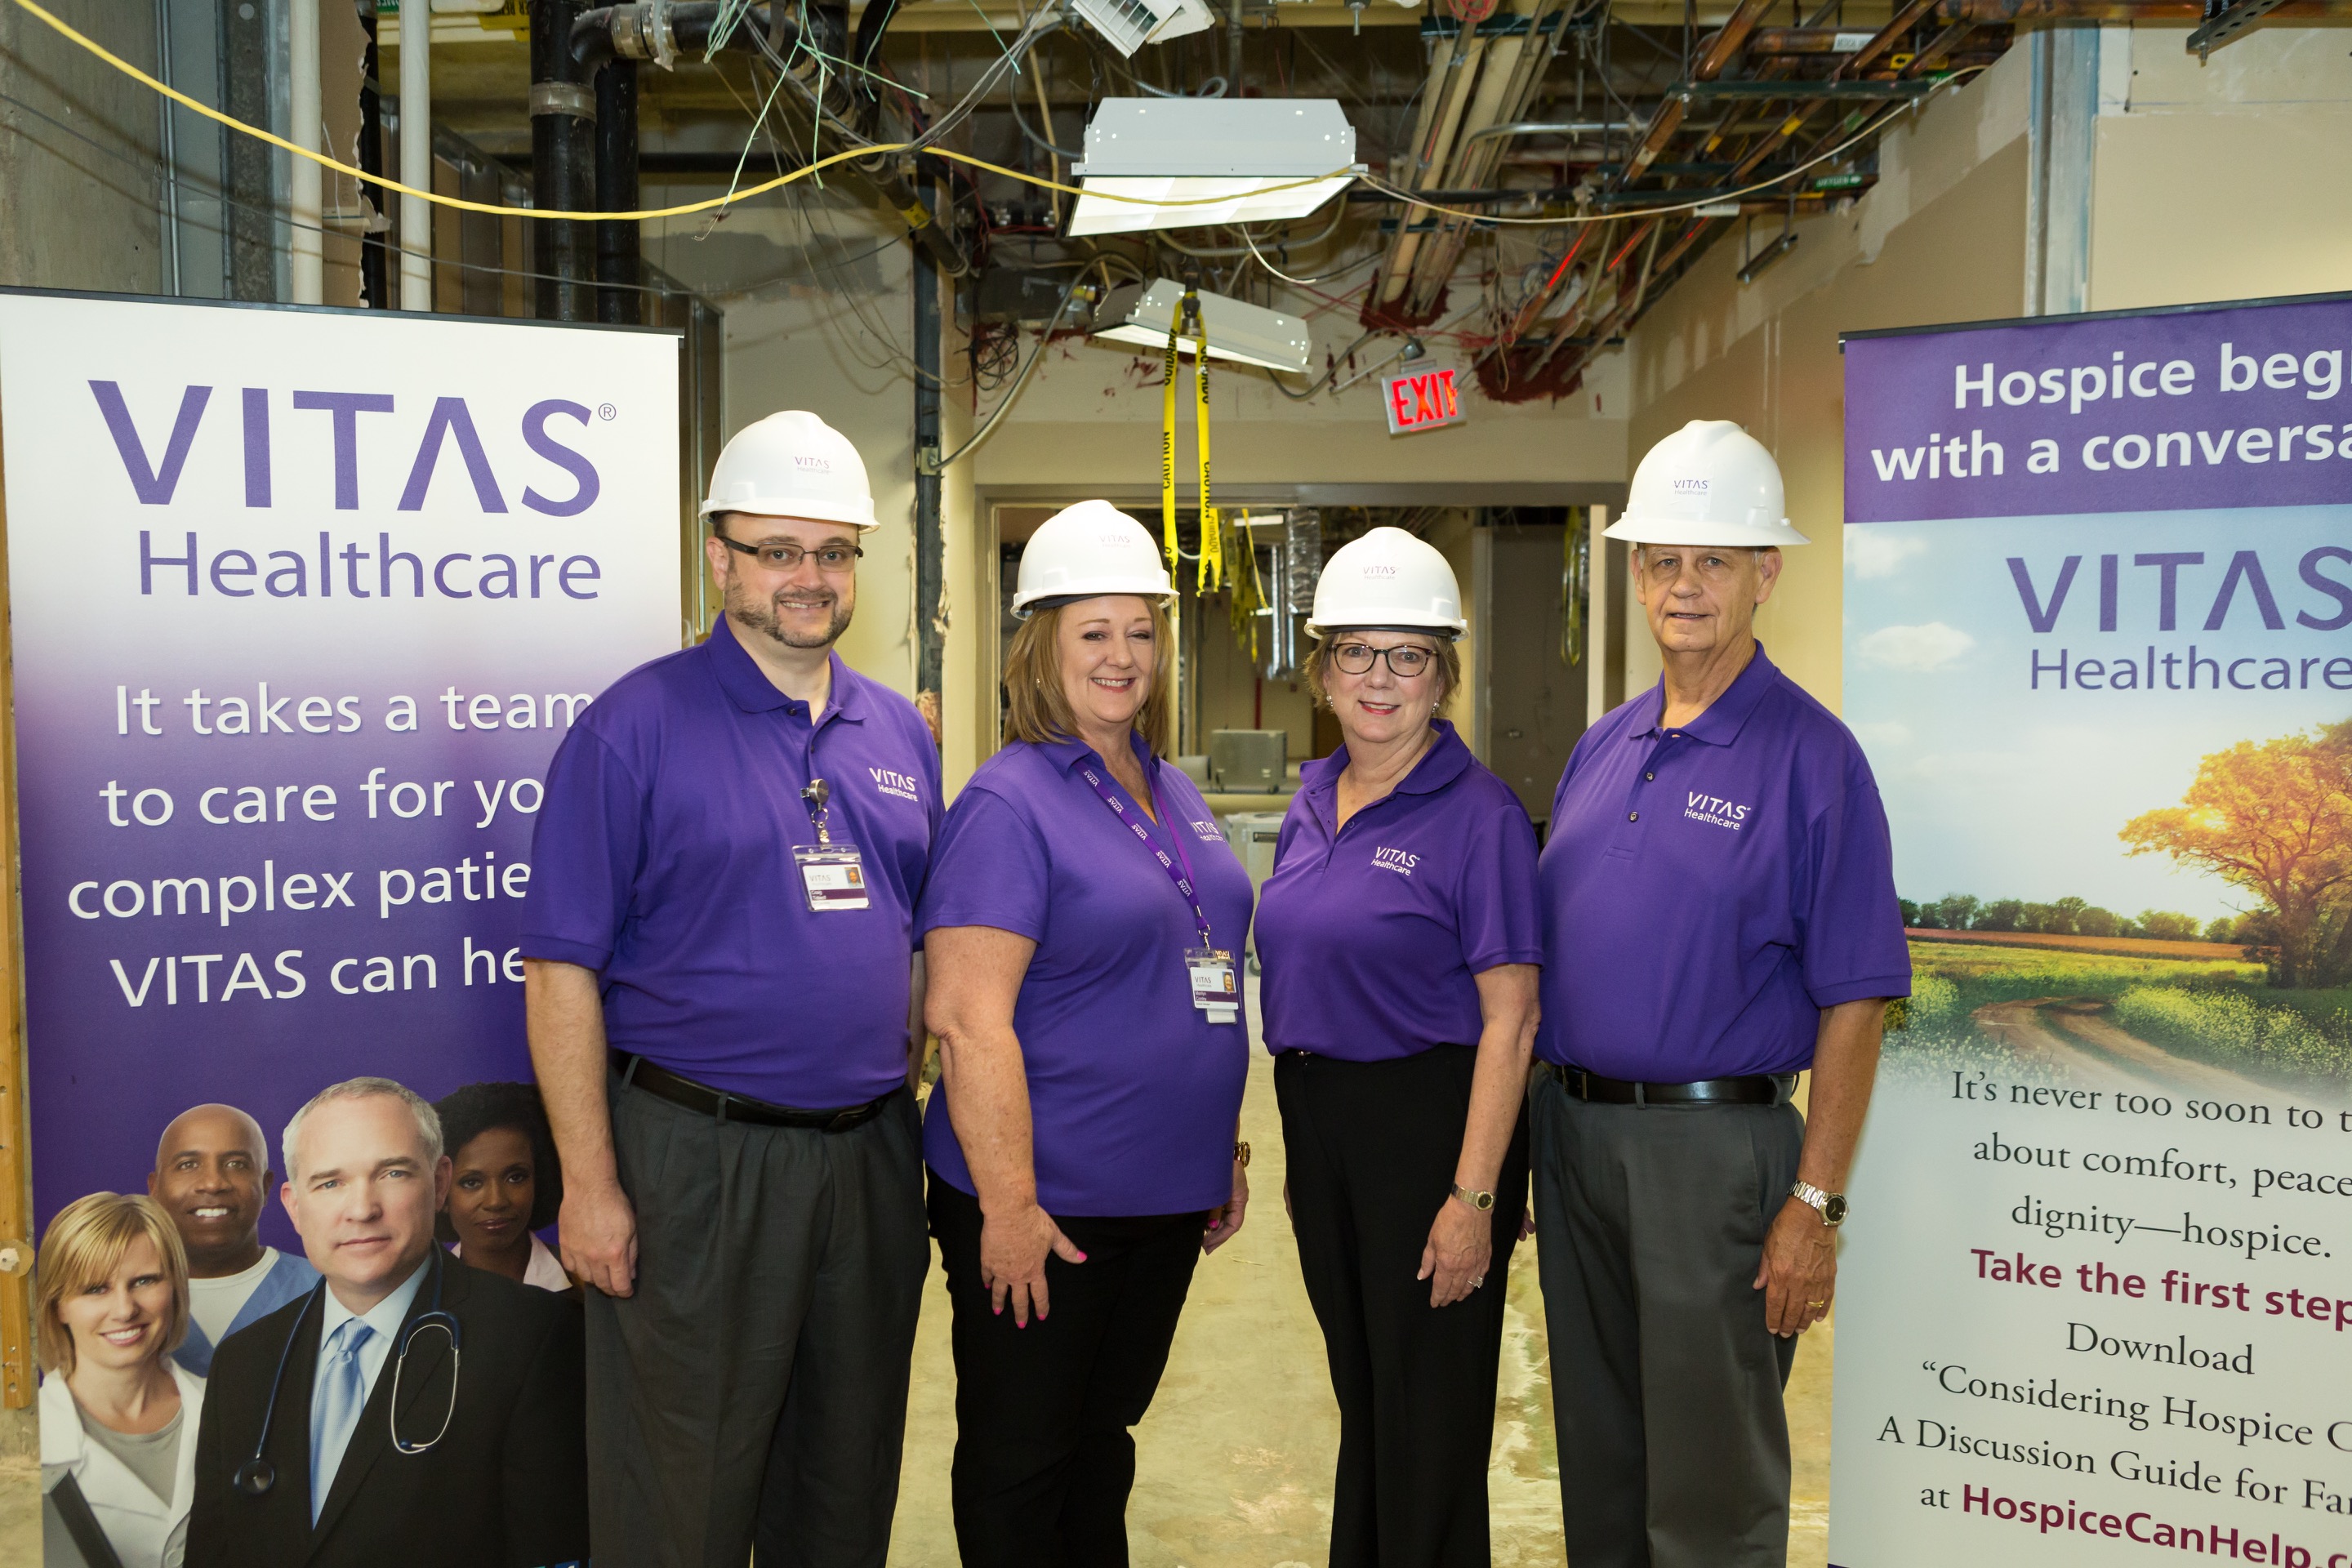 Left to right: VITAS of Dallas executives senior VP of operations Craig Tidwell, general manager Marilyn Conley, VP of operations Kathy Prechtel, and regional medical director James Wright, MD.